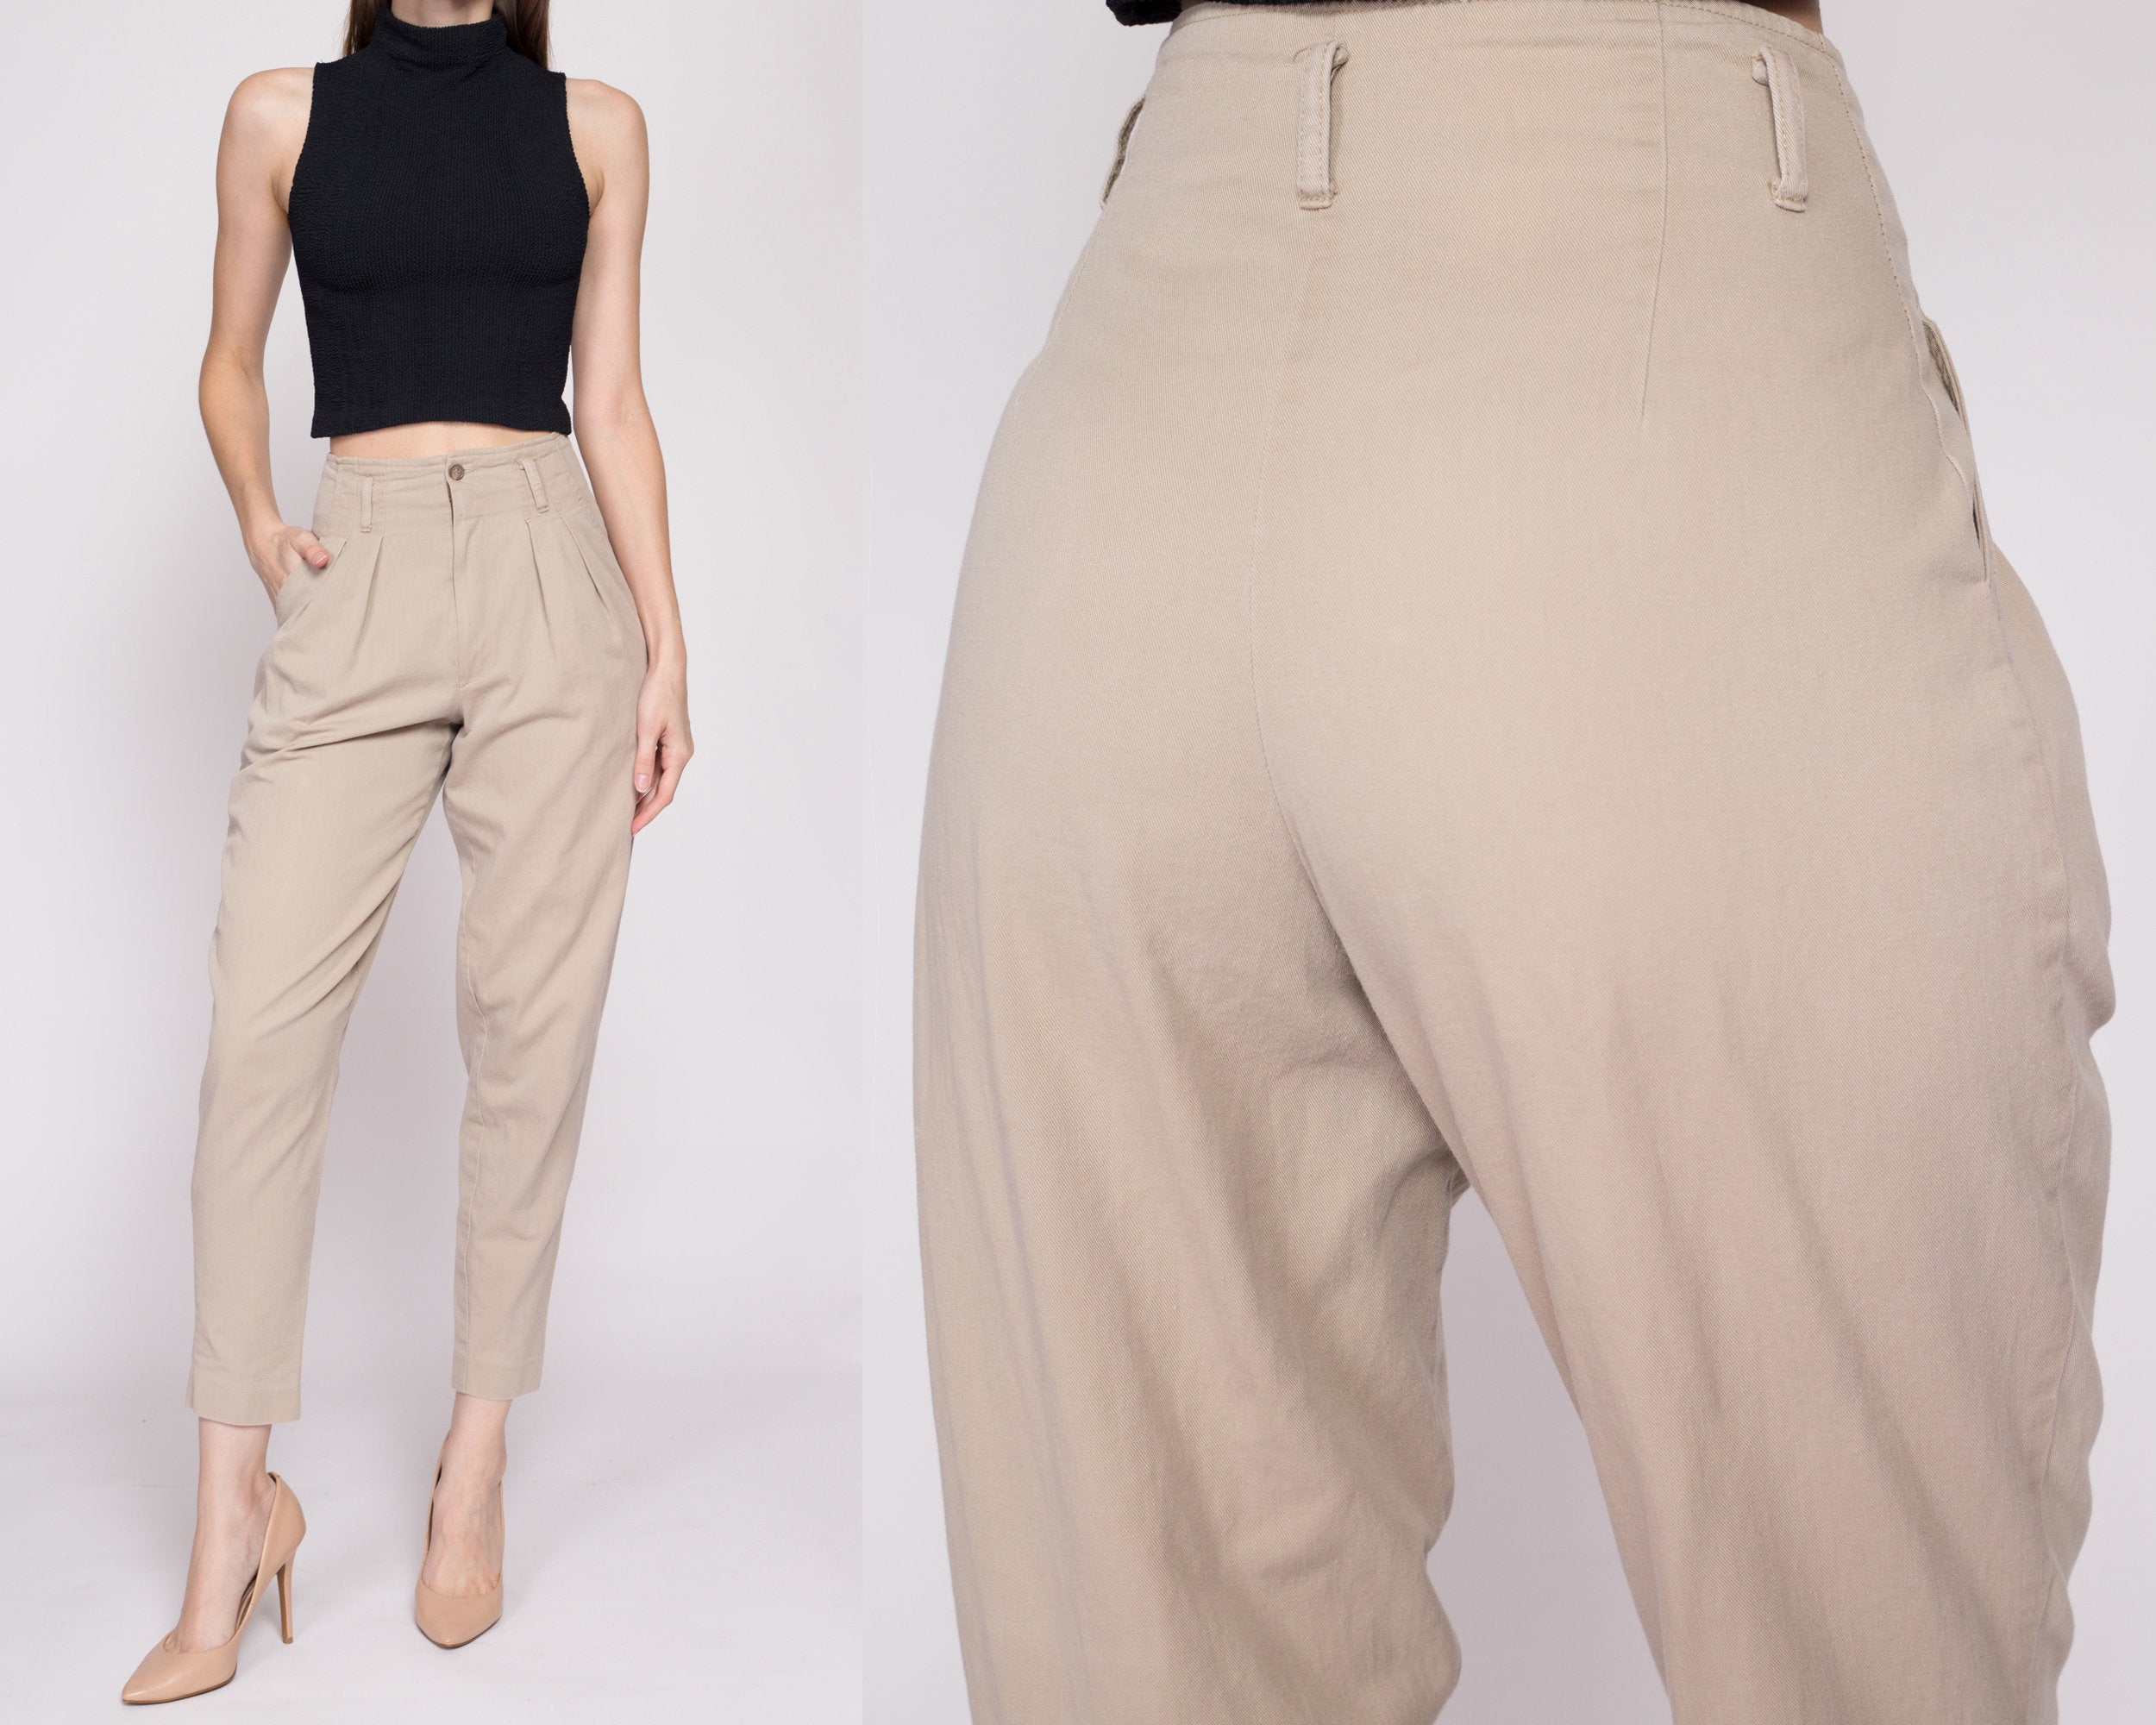 High-waist pants with wide leg and front slits in white | D2line